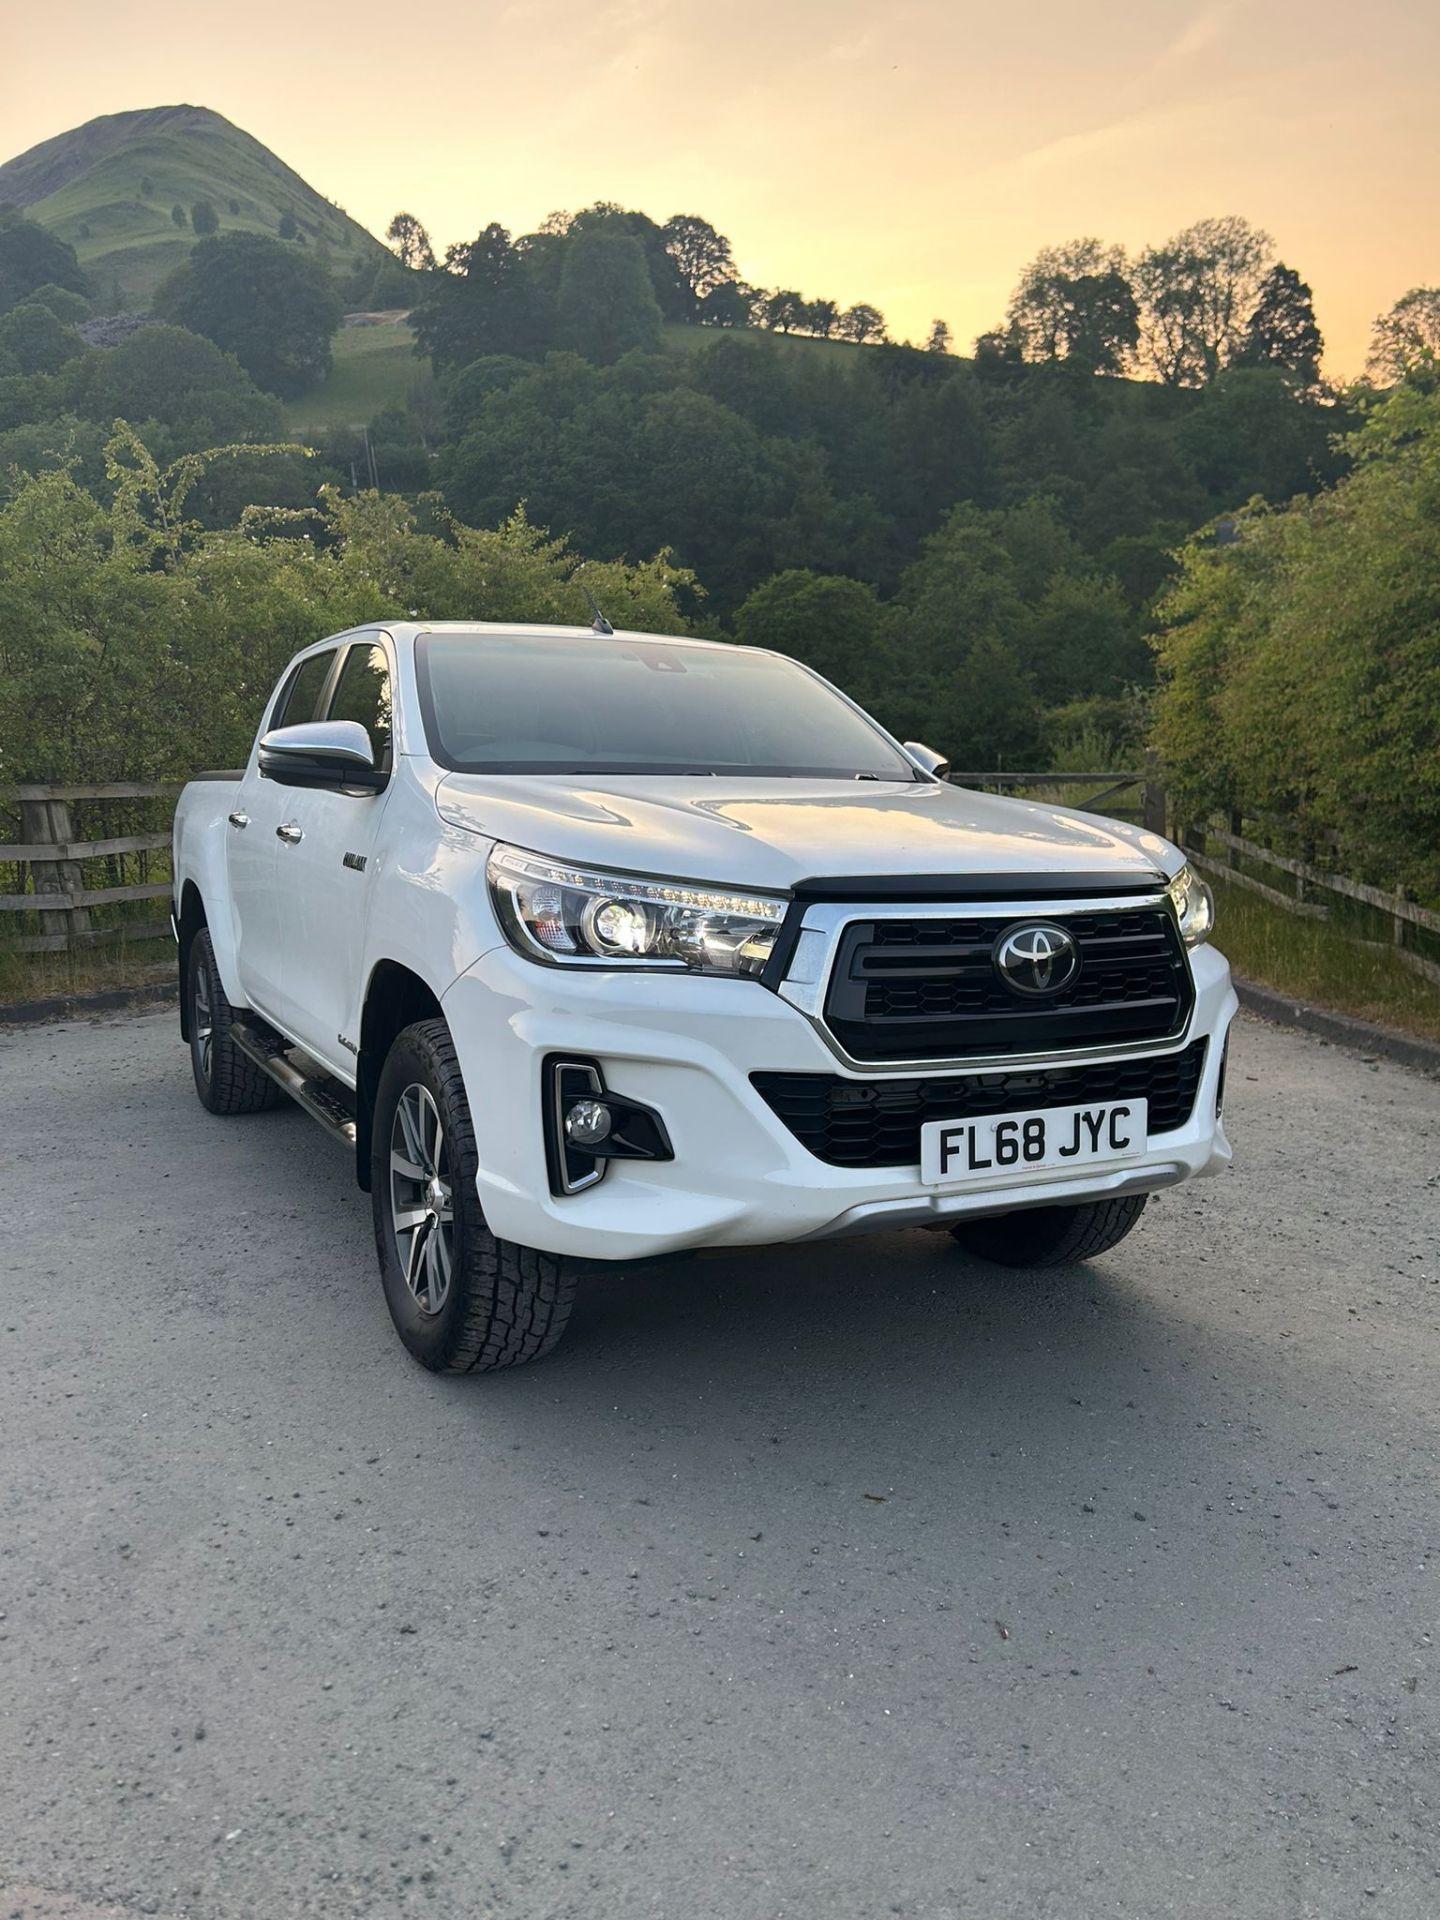 AUTOMATIC 2018 TOYOTA HILUX LIMITED EDITION FACELIFT ROLLER SHUTTER - Image 2 of 18